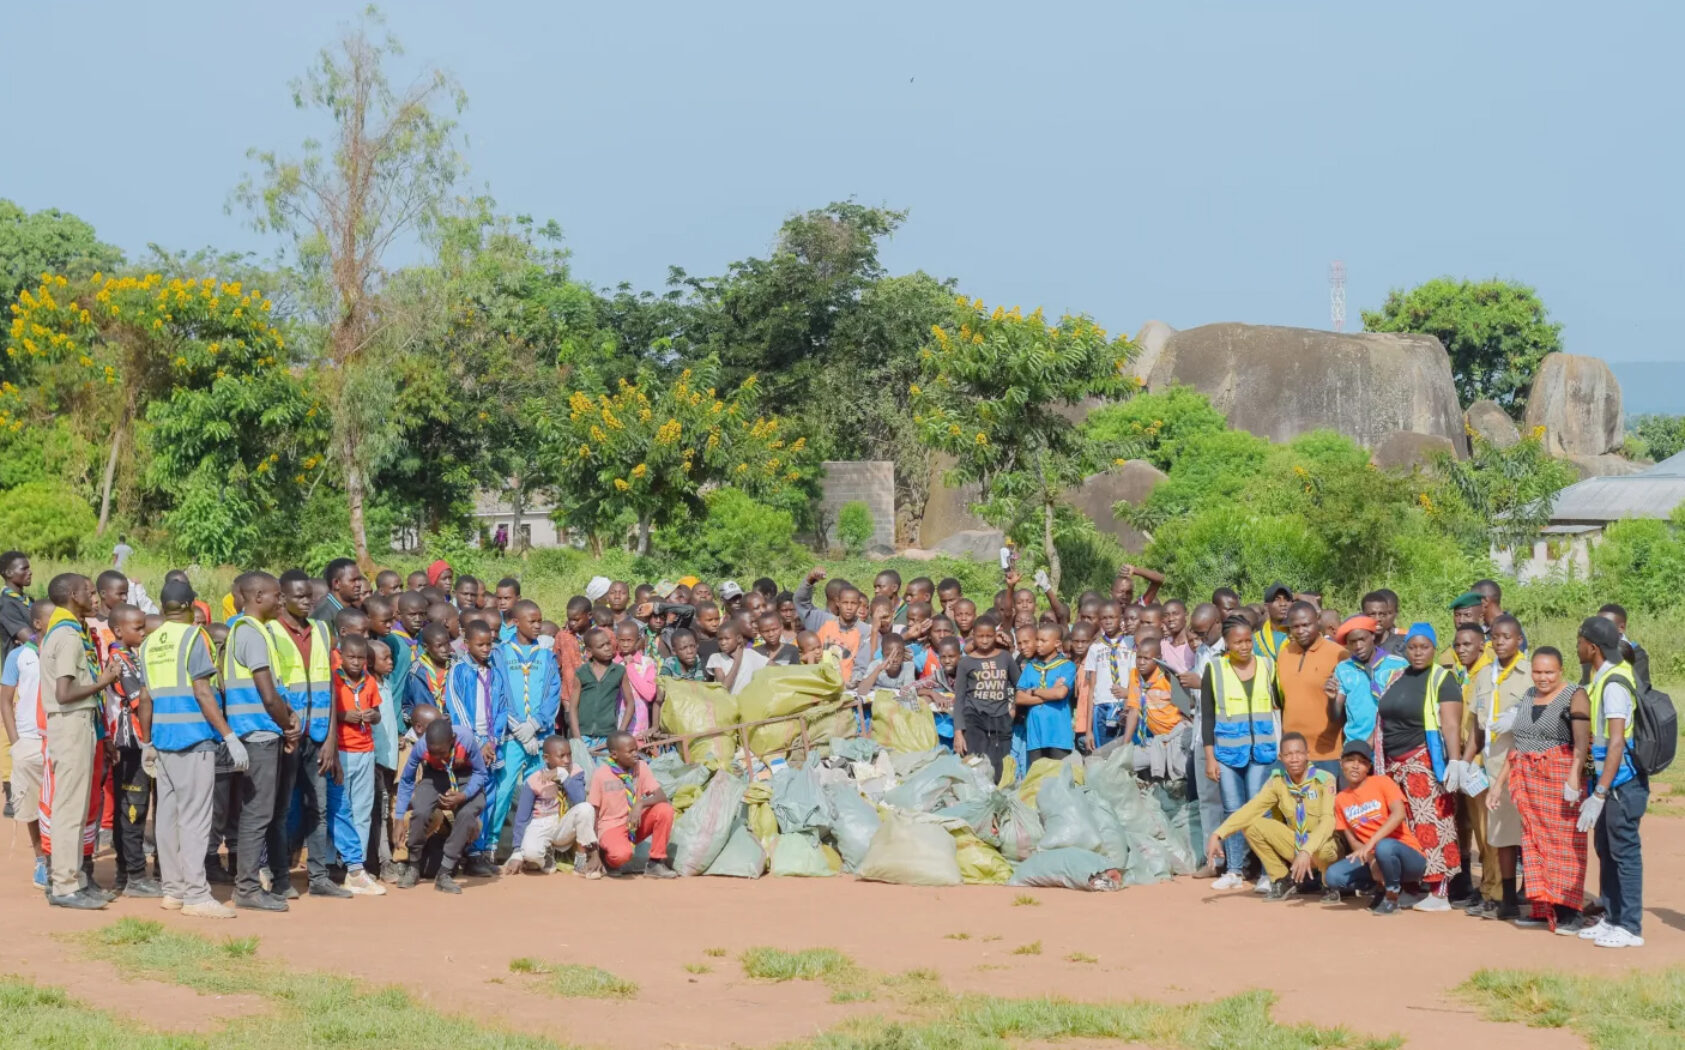 NORCE, Throughout the project, thousands of volunteers actively participated in clean-up efforts as part of the Clean Shores, Great Lakes initiative in Tanzania. After a cleaning session, here are some of them gathered., Great lakes clean shores group picture, , 